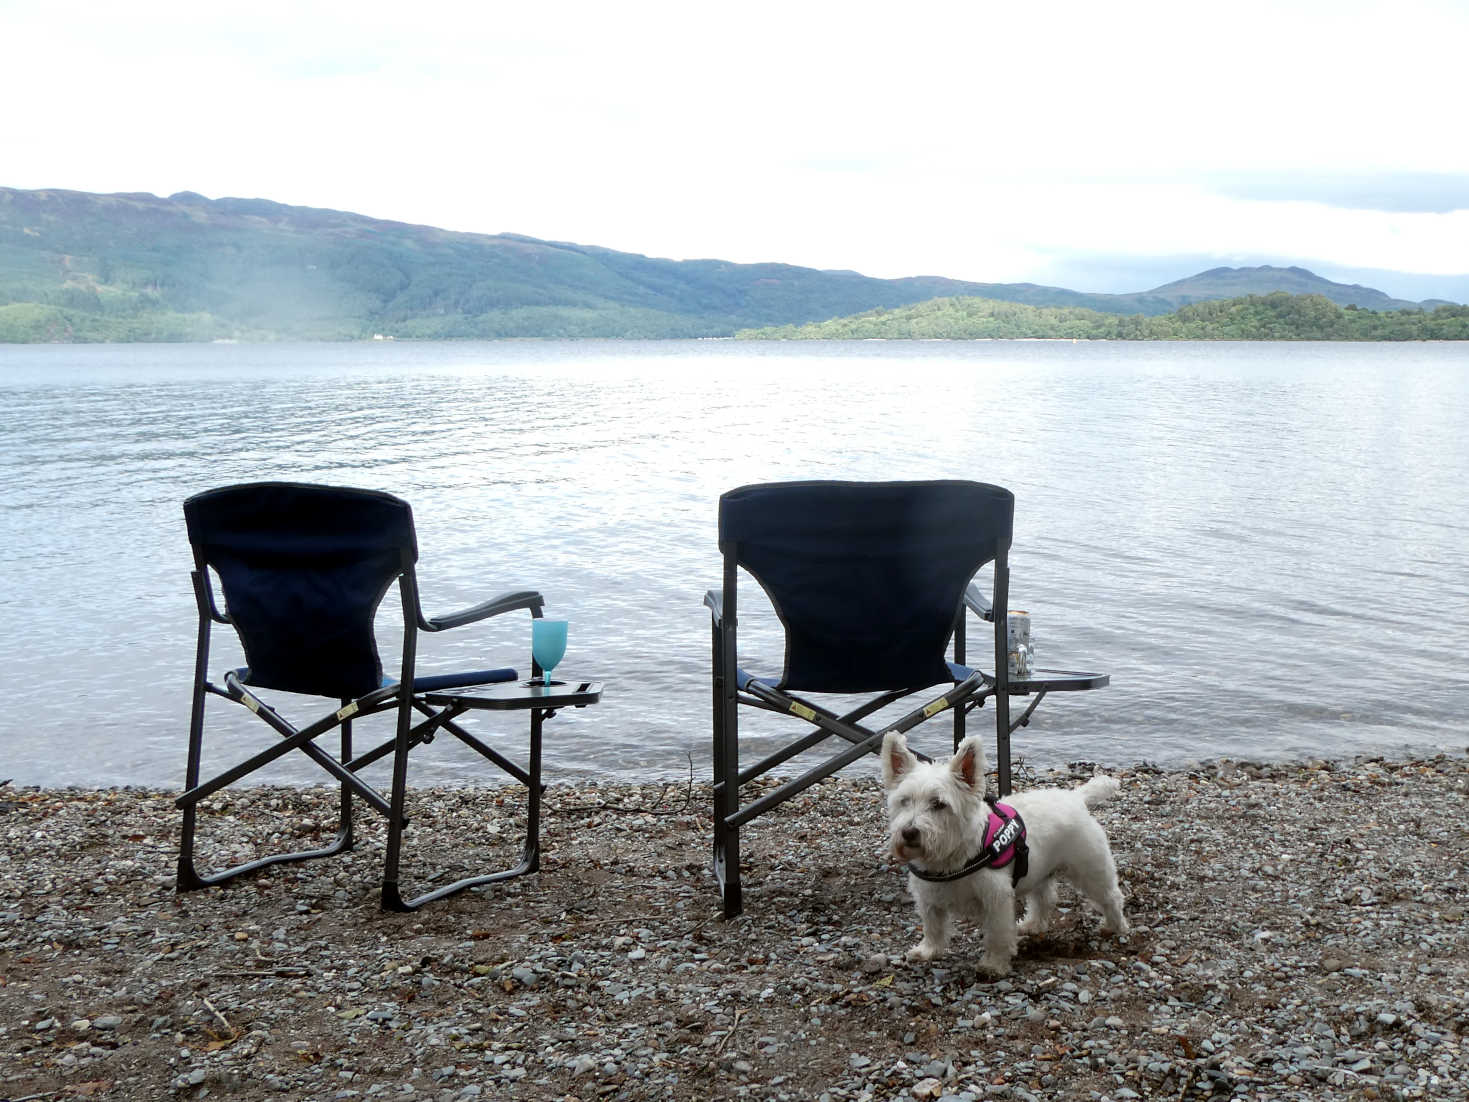 poppy the westie guards the chairs from ducks at Loch Lomond